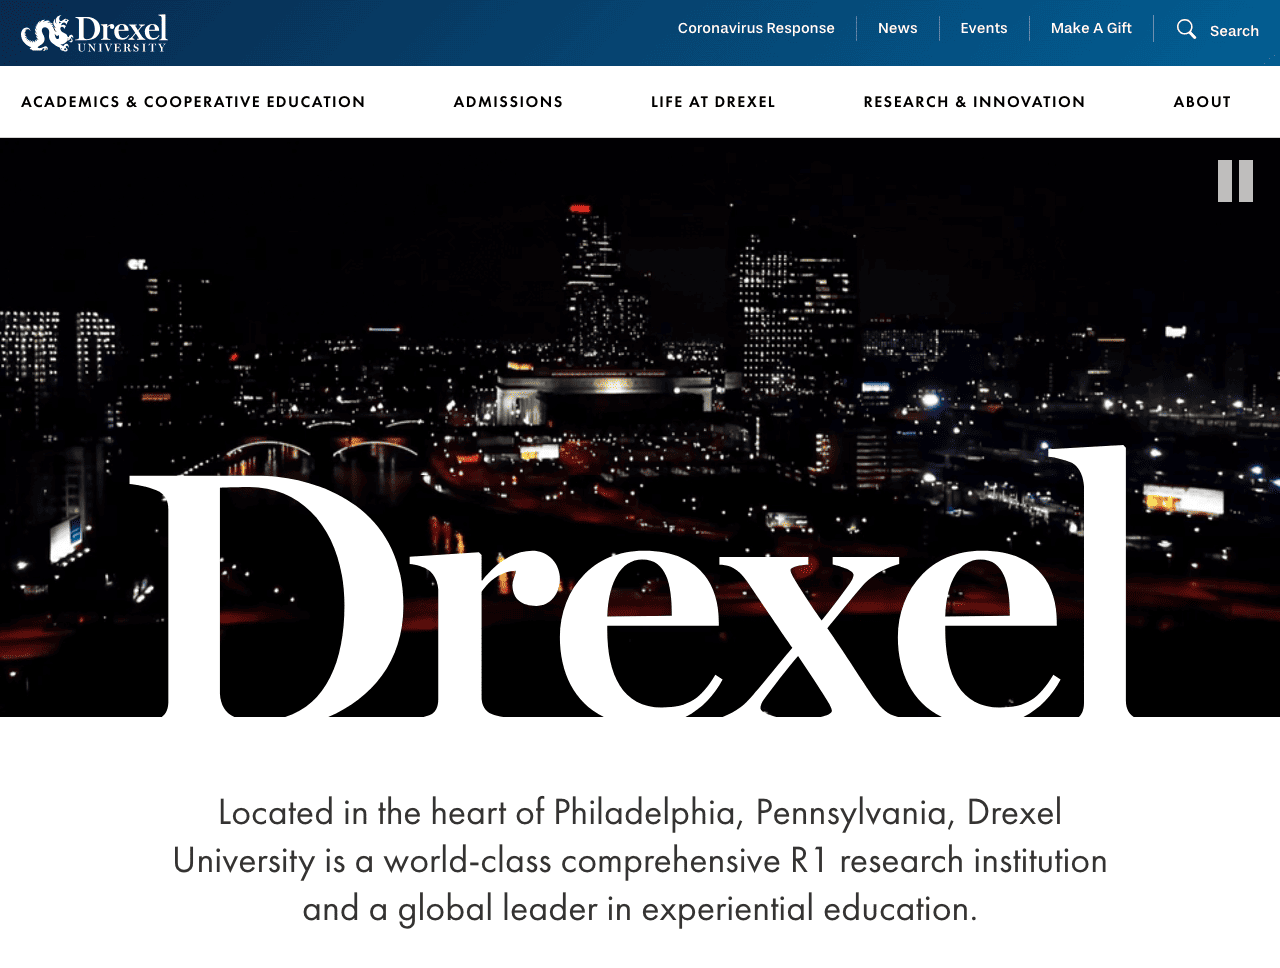 The homepage of drexel, located in the heart of philadelphia, pennsylvania.